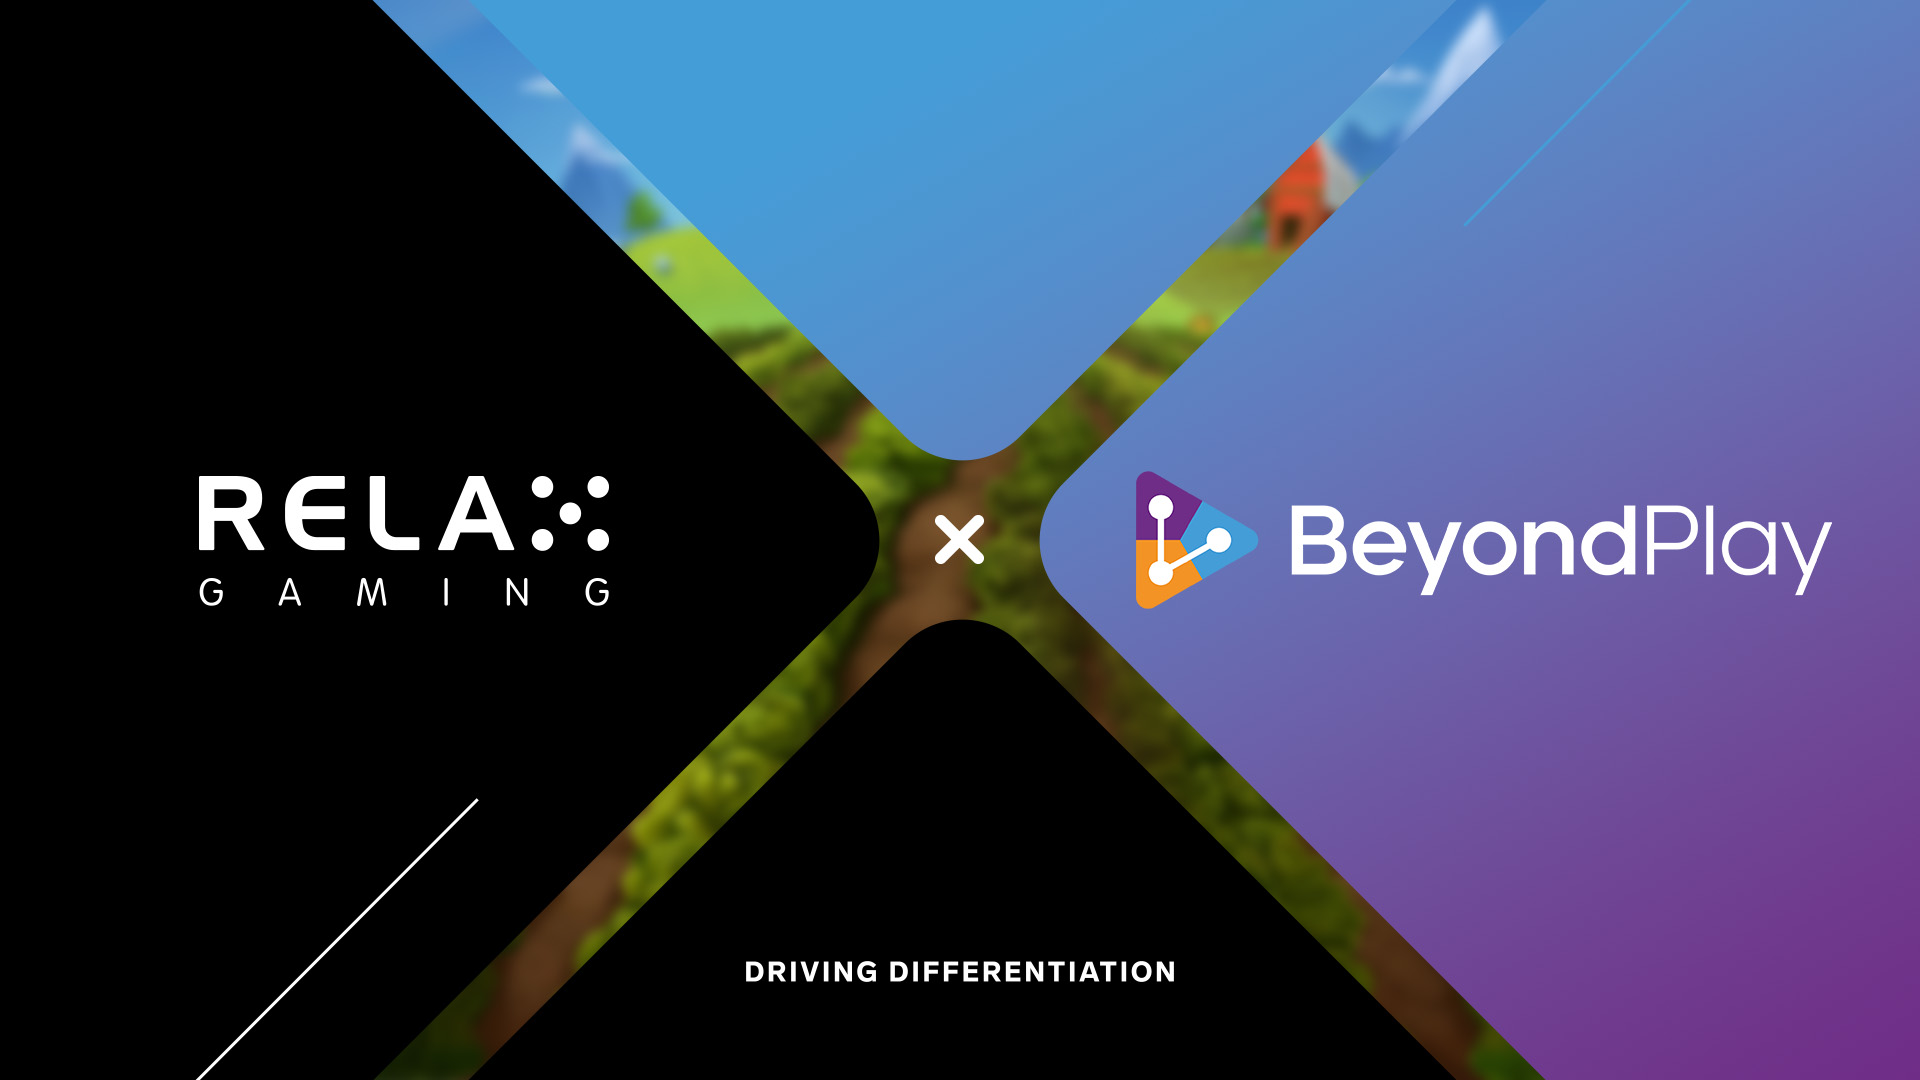 Relax Gaming partners with BeyondPlay to enable revolutionary multiplayer gameplay